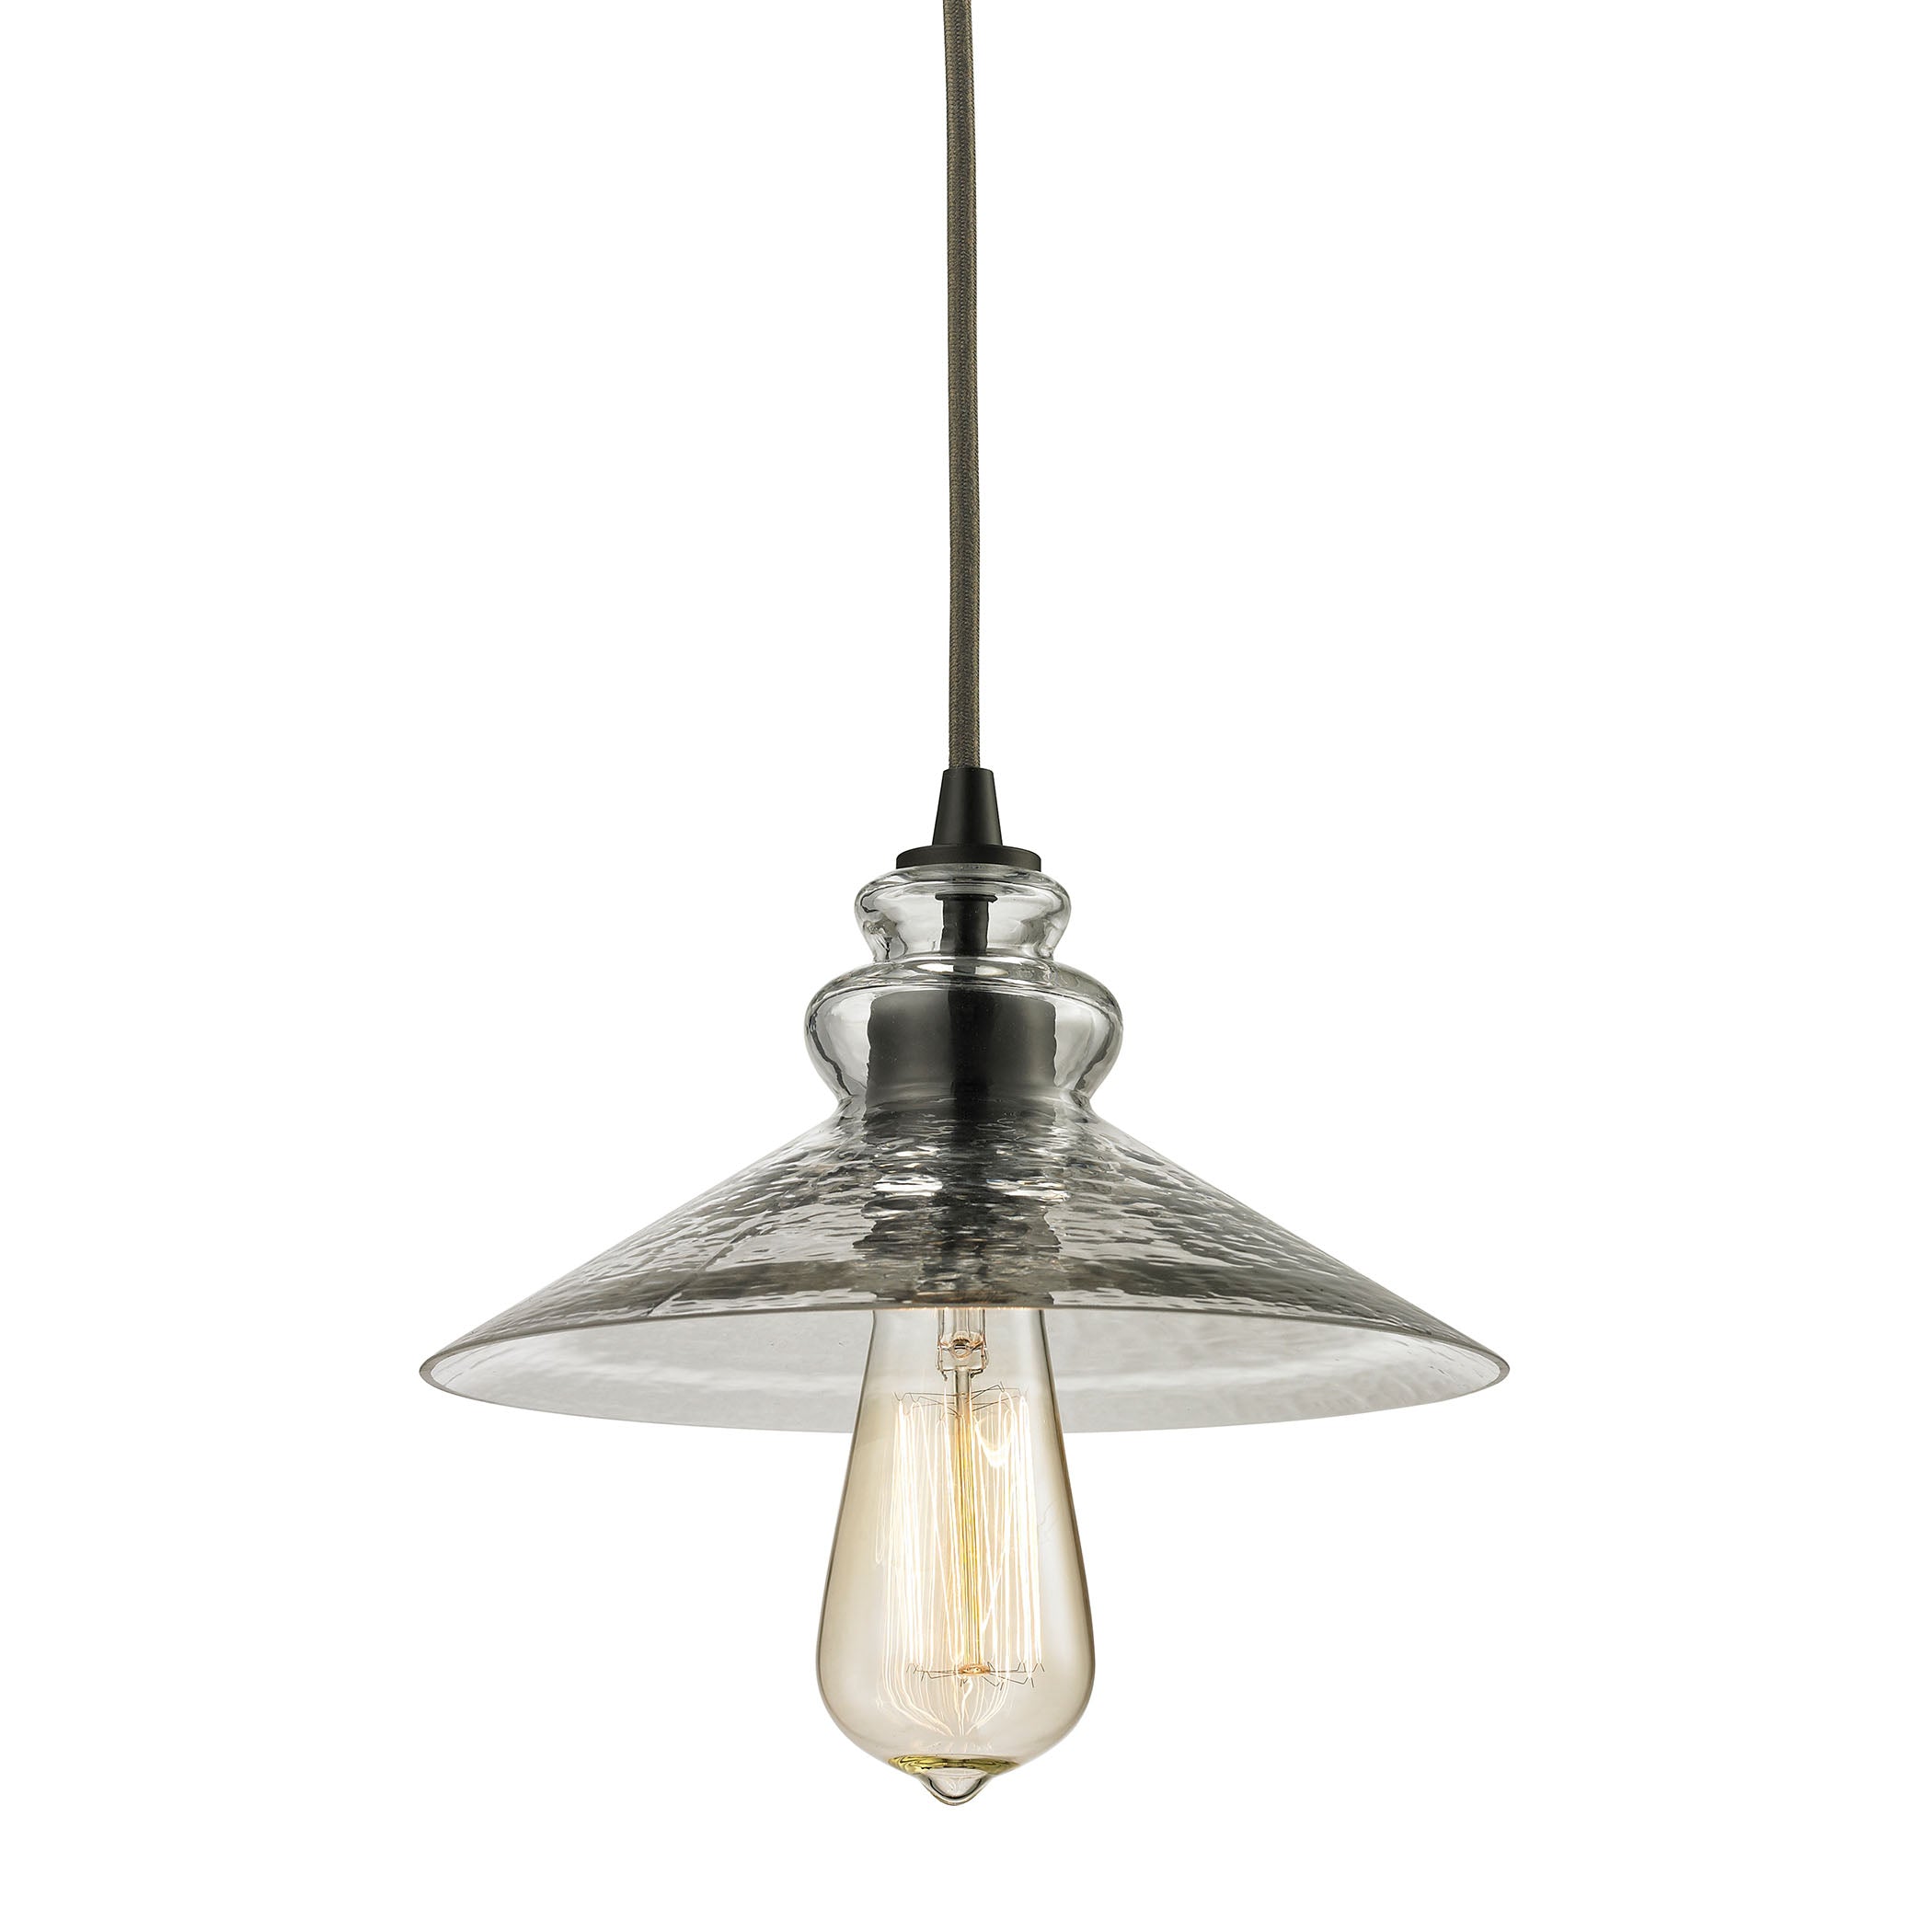 ELK Lighting 10332/1 Hammered Glass 1-Light Mini Pendant in Oiled Bronze with Hammered Clear Glass